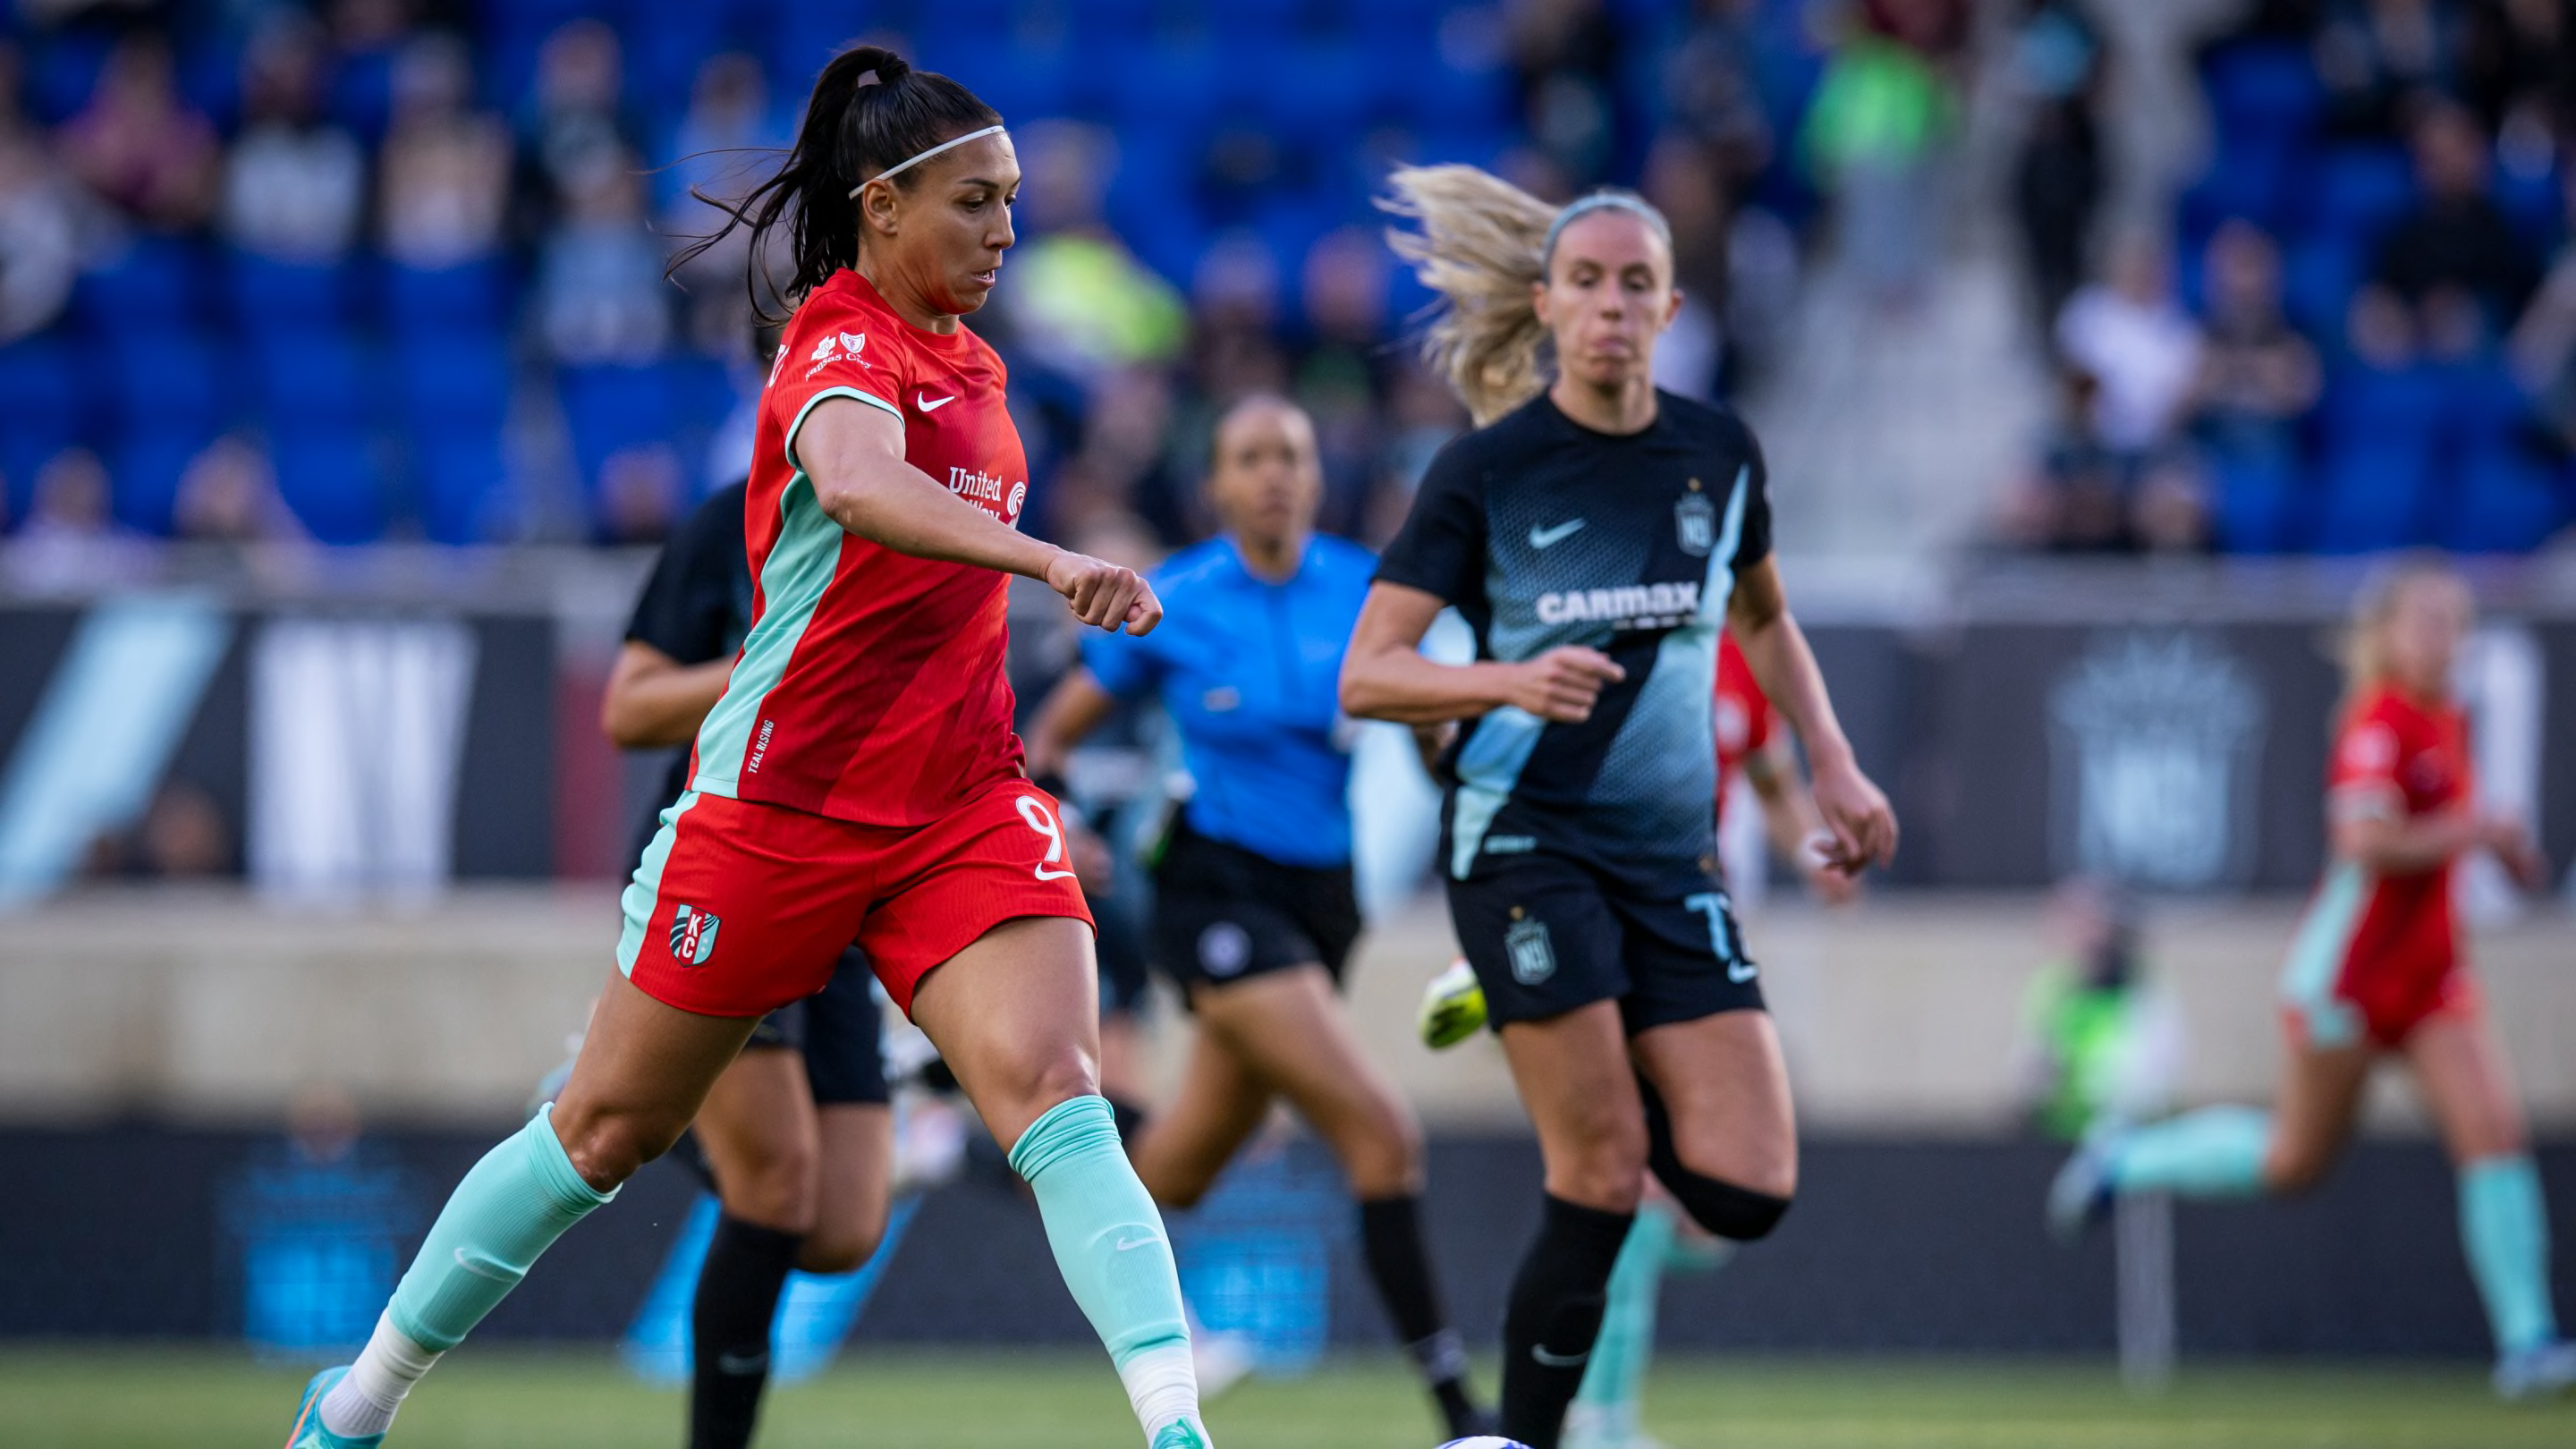 When are the NWSL playoffs?